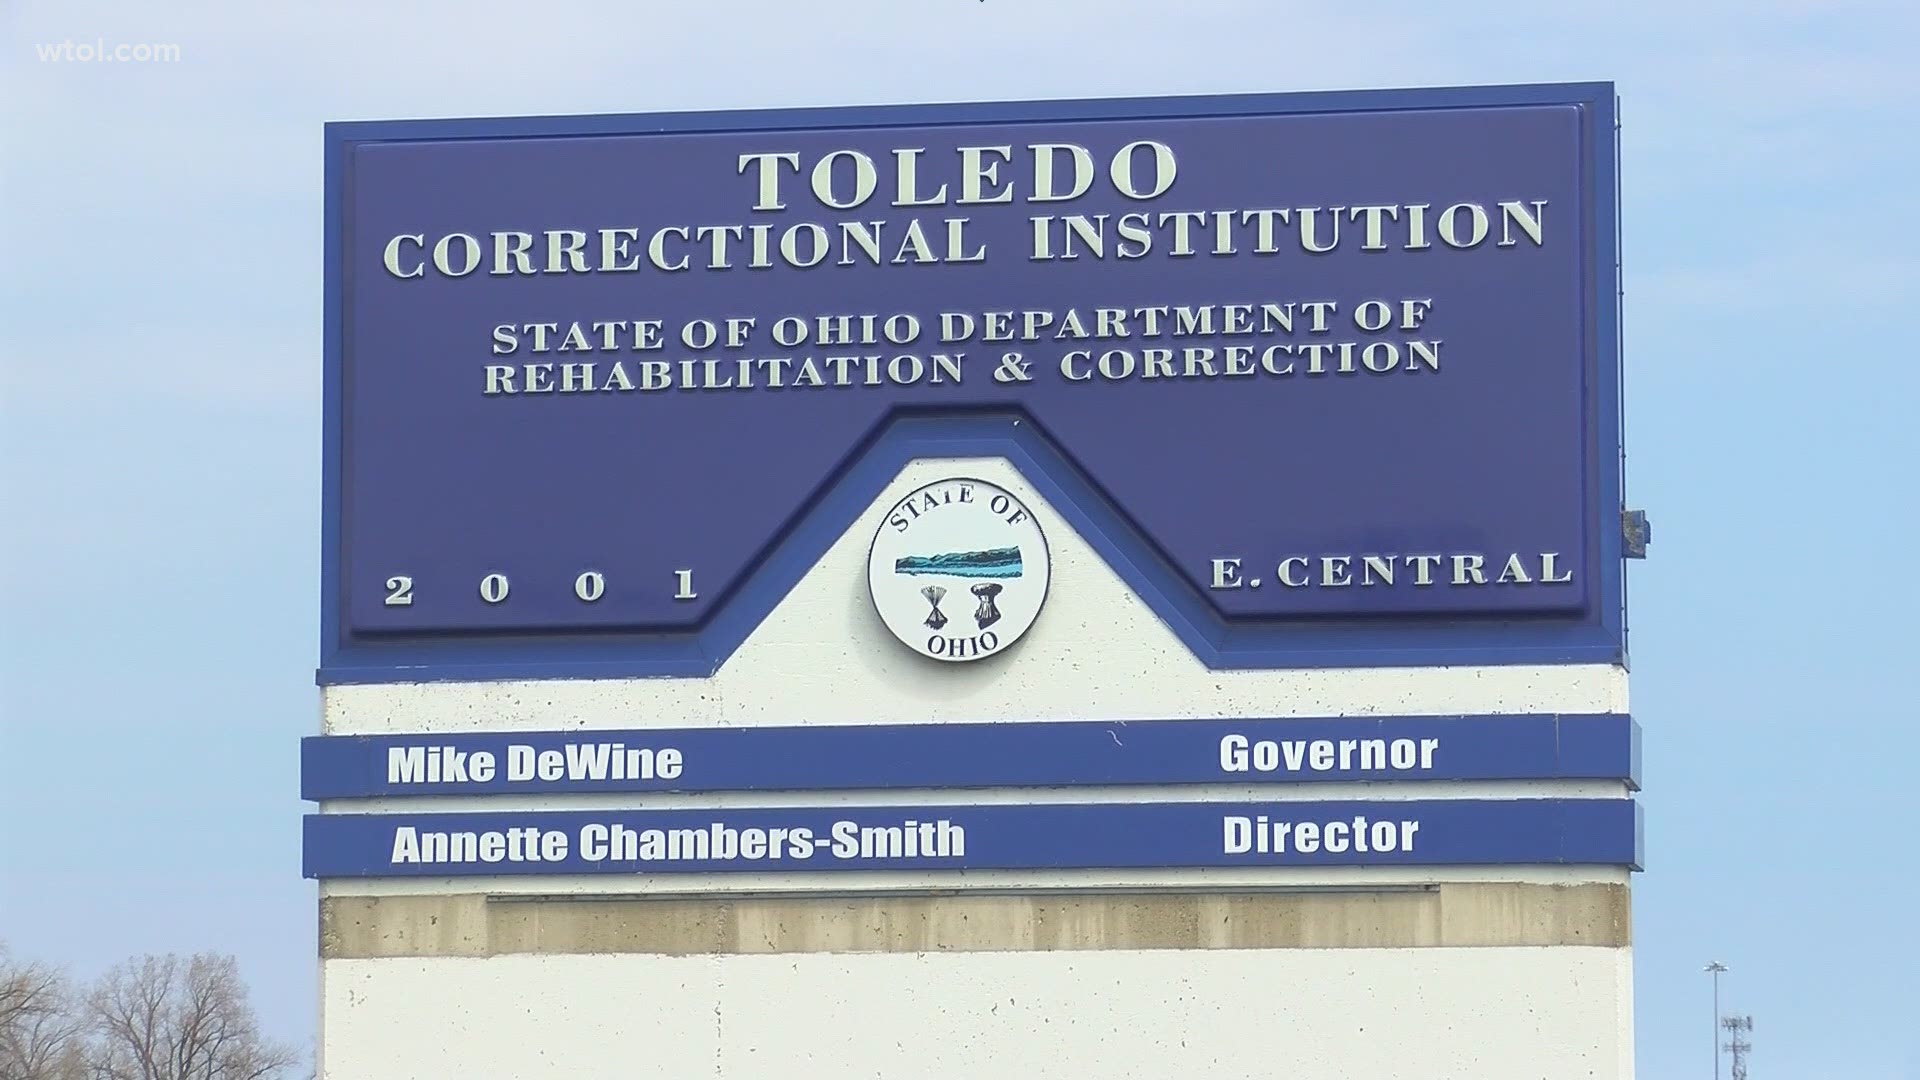 According to family, the inmate has been showing COVID-19 symptoms since Saturday but he hasn't been tested and is in quarantine with other inmates.